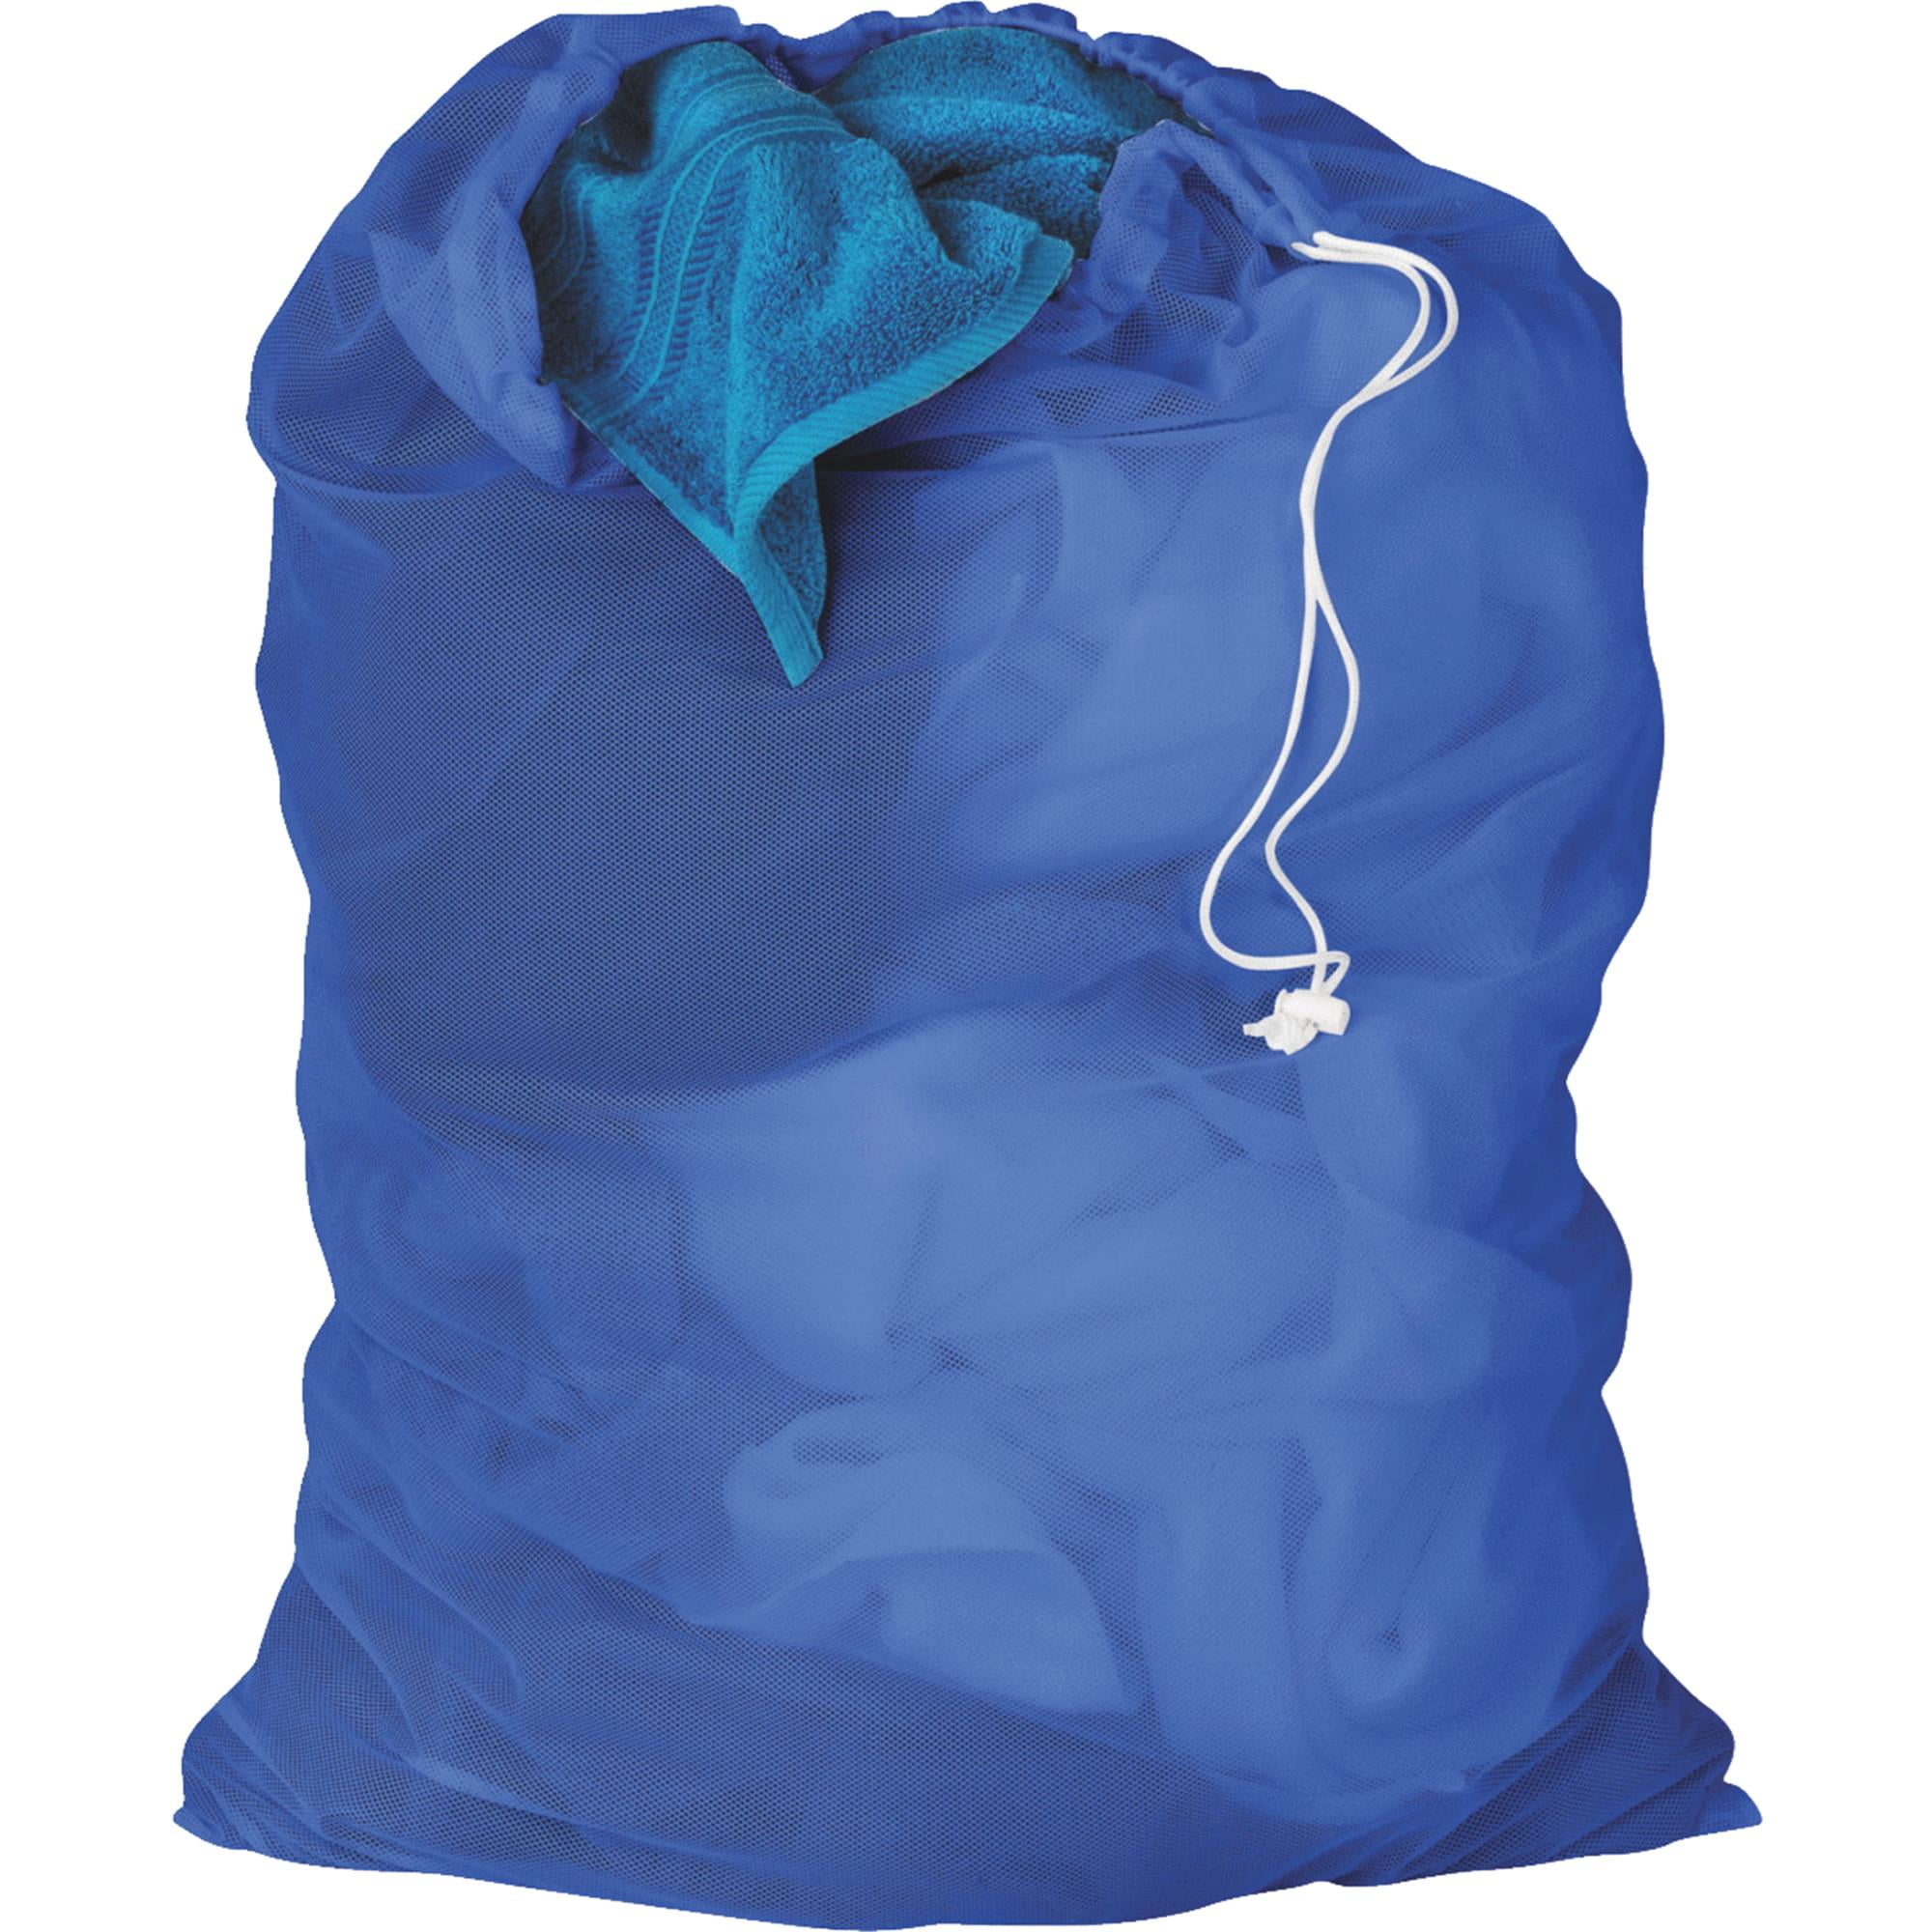 MESH LAUNDRY BAGS 36in x24 polyester extra large size 